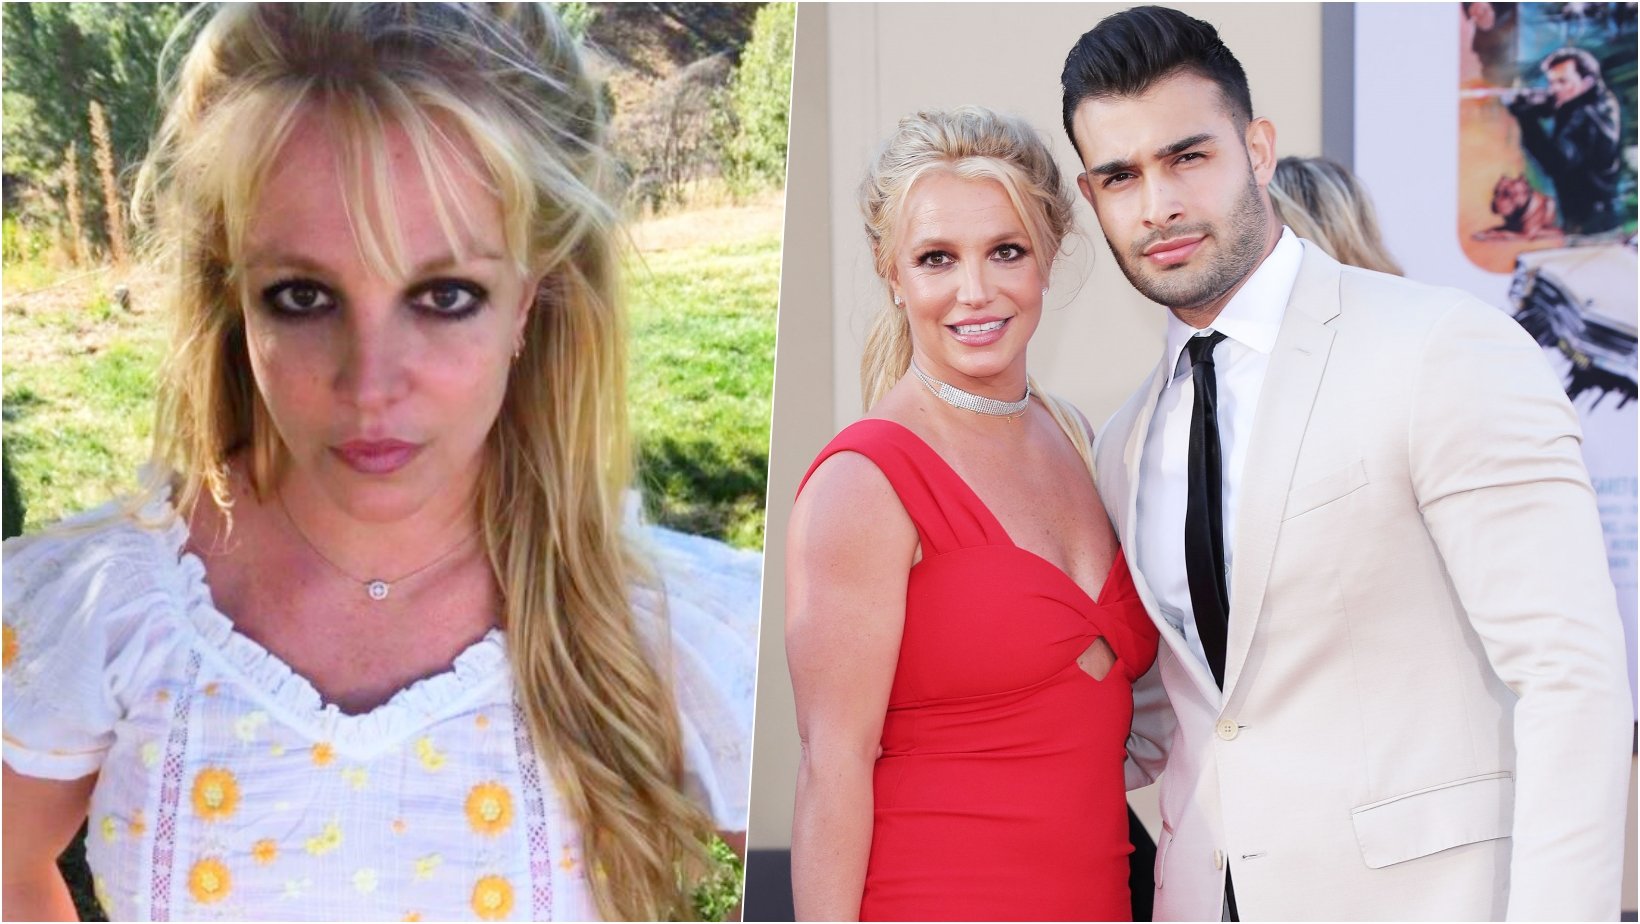 6 facebook cover 29.jpg?resize=1200,630 - Britney Spears Finally Returns To Social Media After A Weekend Getaway Celebrating Her Engagement With Fiancé Sam Asghari